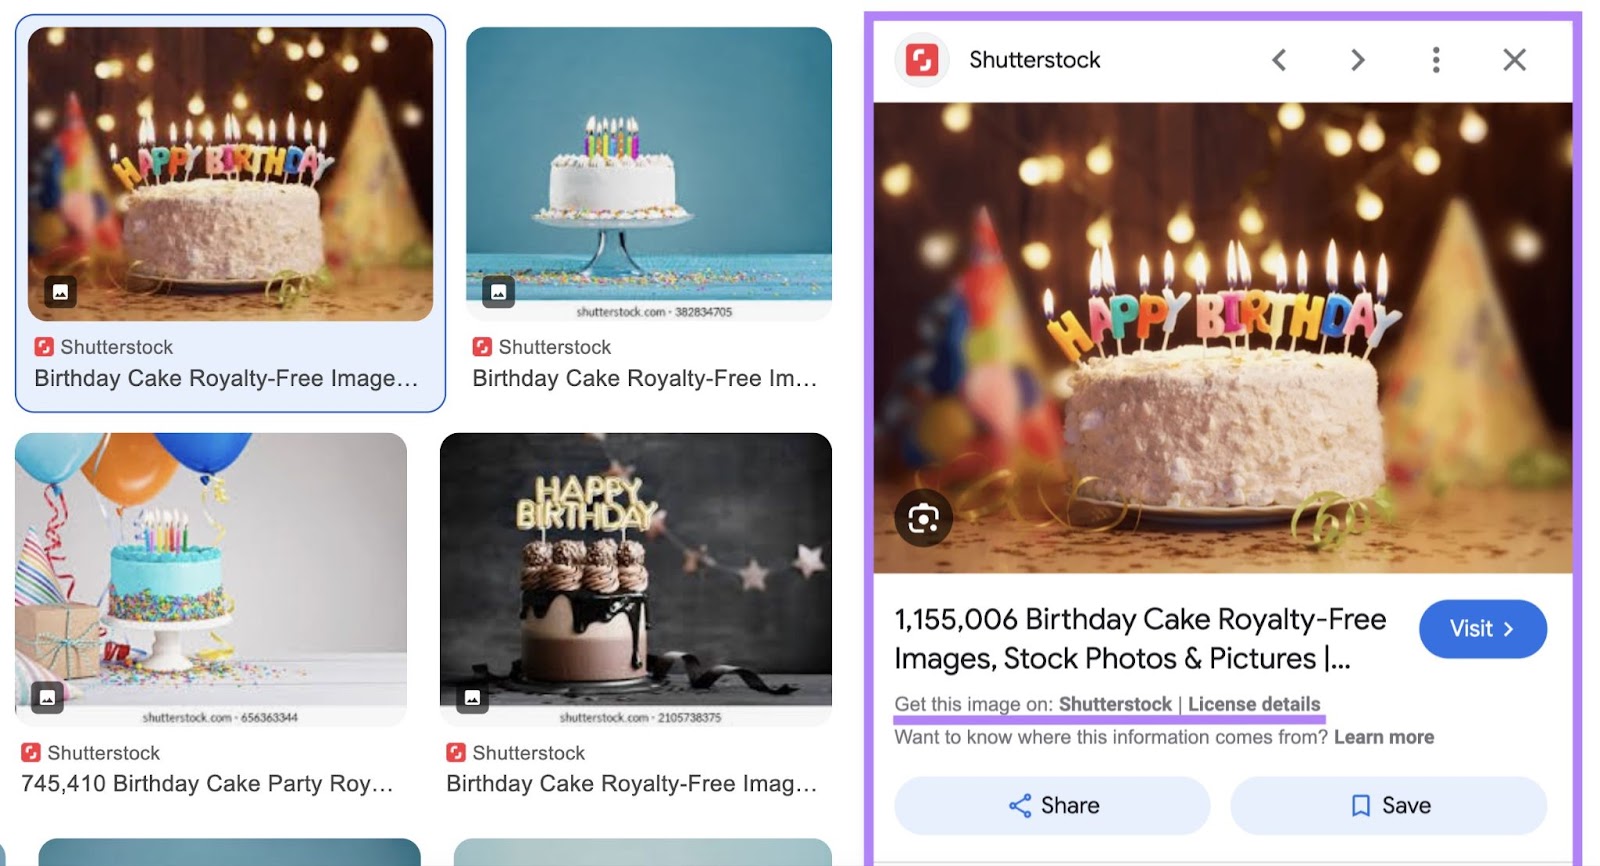 expanded google image result of a birthday cake shows you can get the image on shutterstock and a link to license details